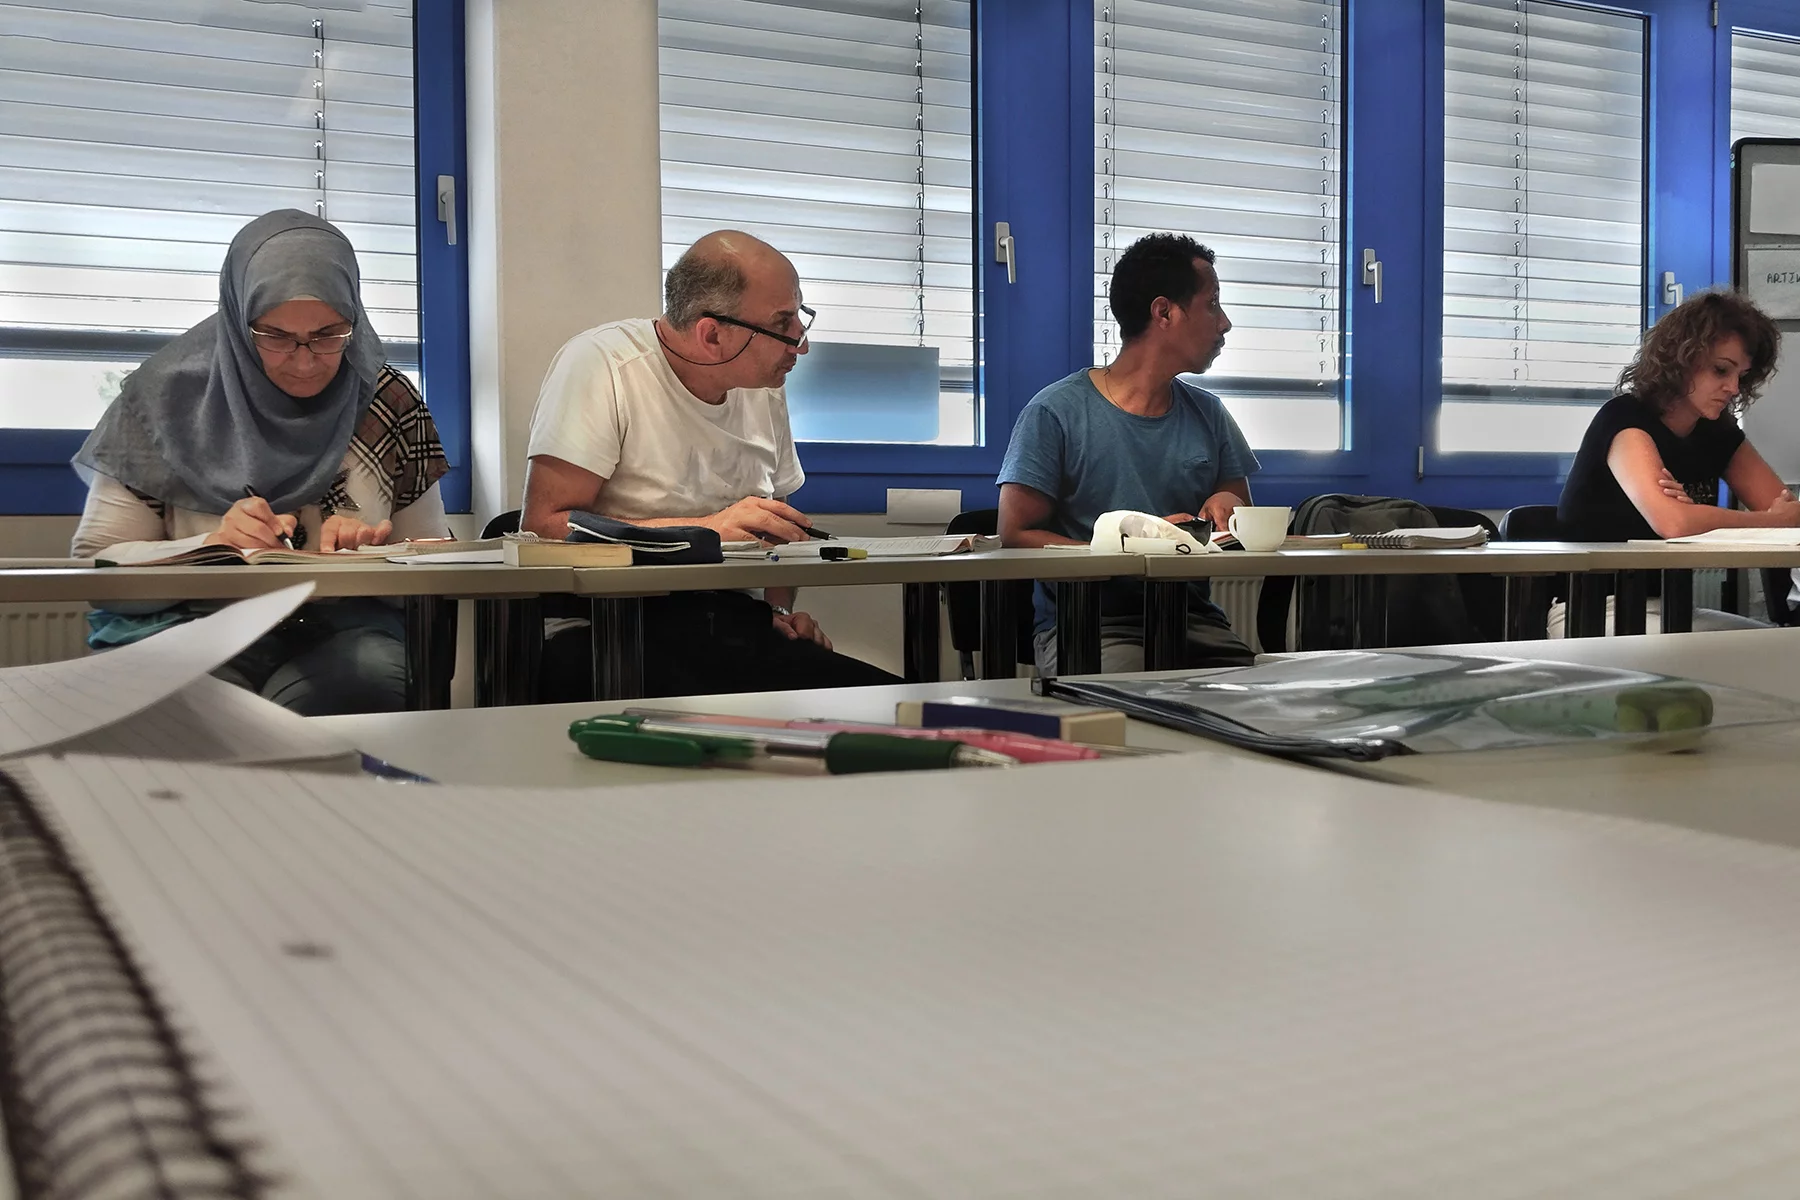 A German class for newcomers